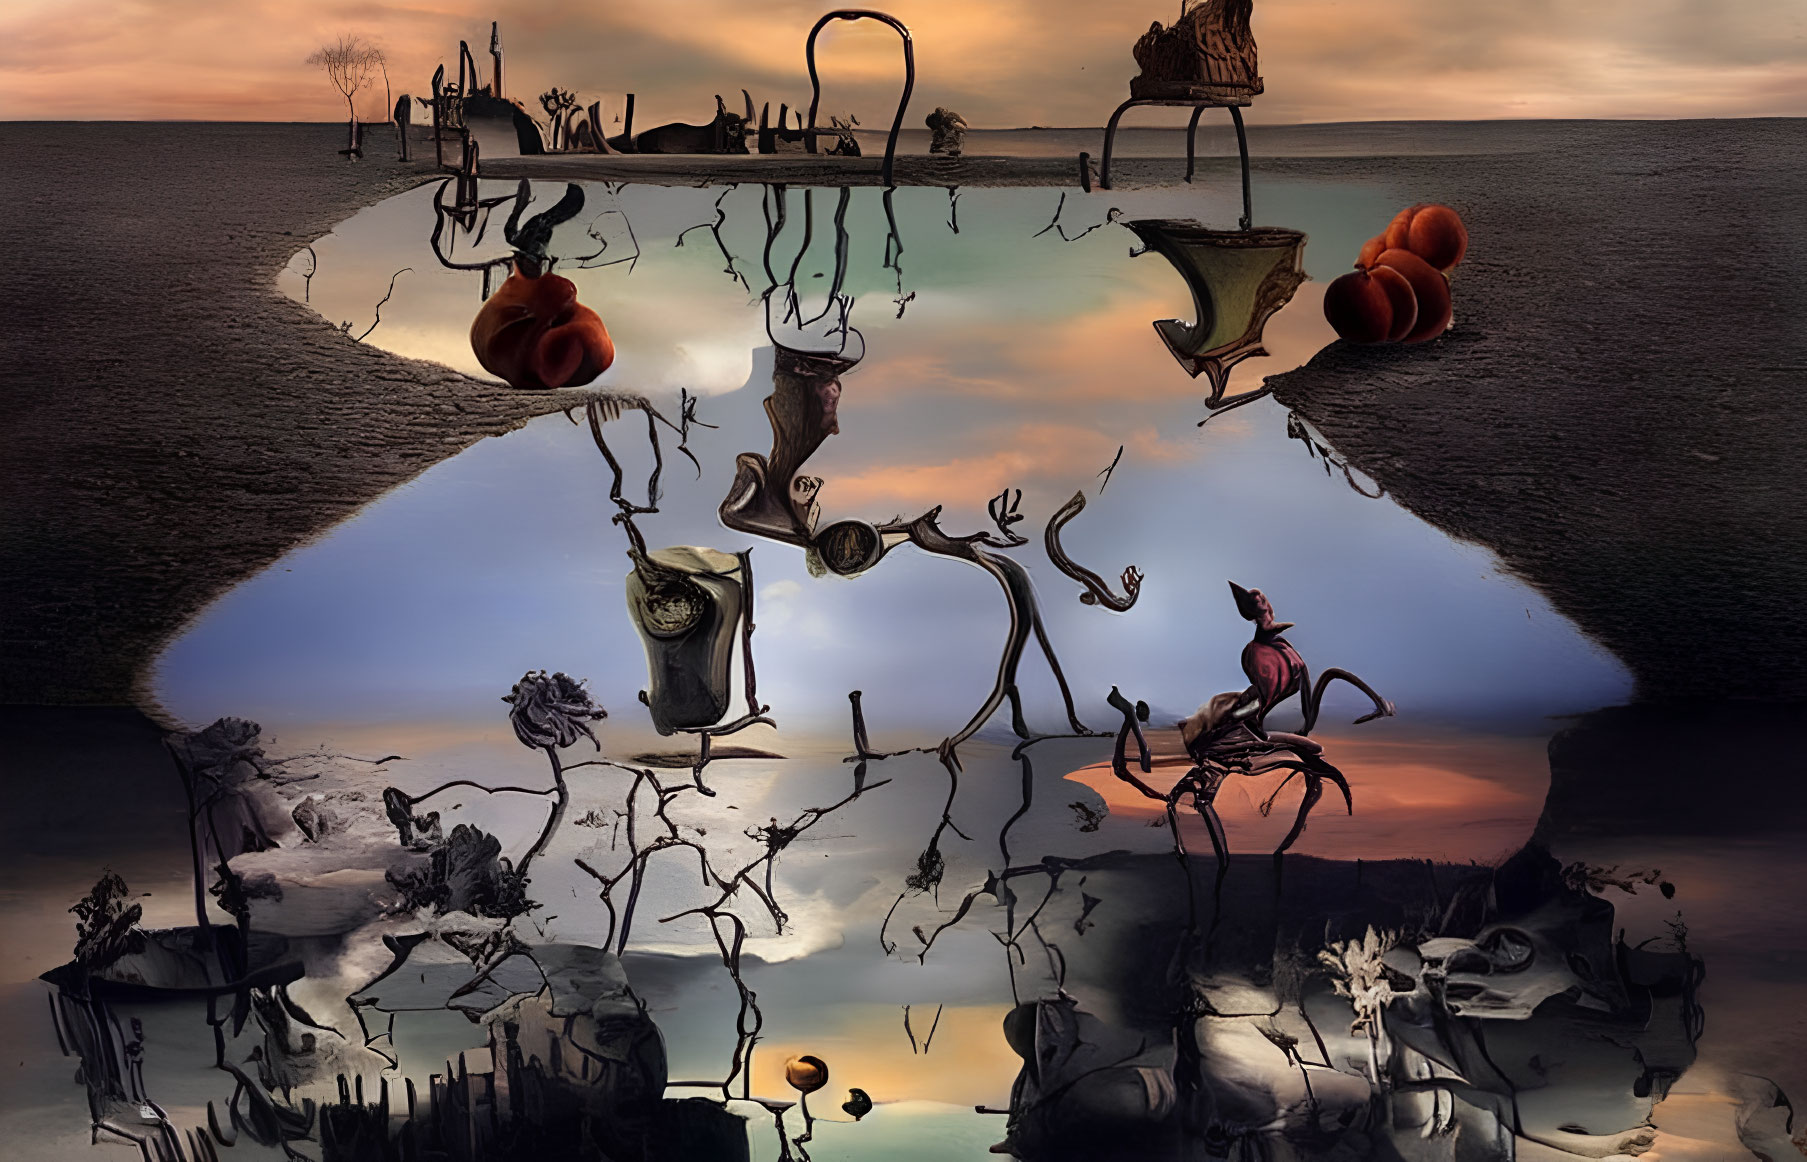 Surreal landscape with mirrored surfaces, whimsical trees, antler-like structures, pumpkins,